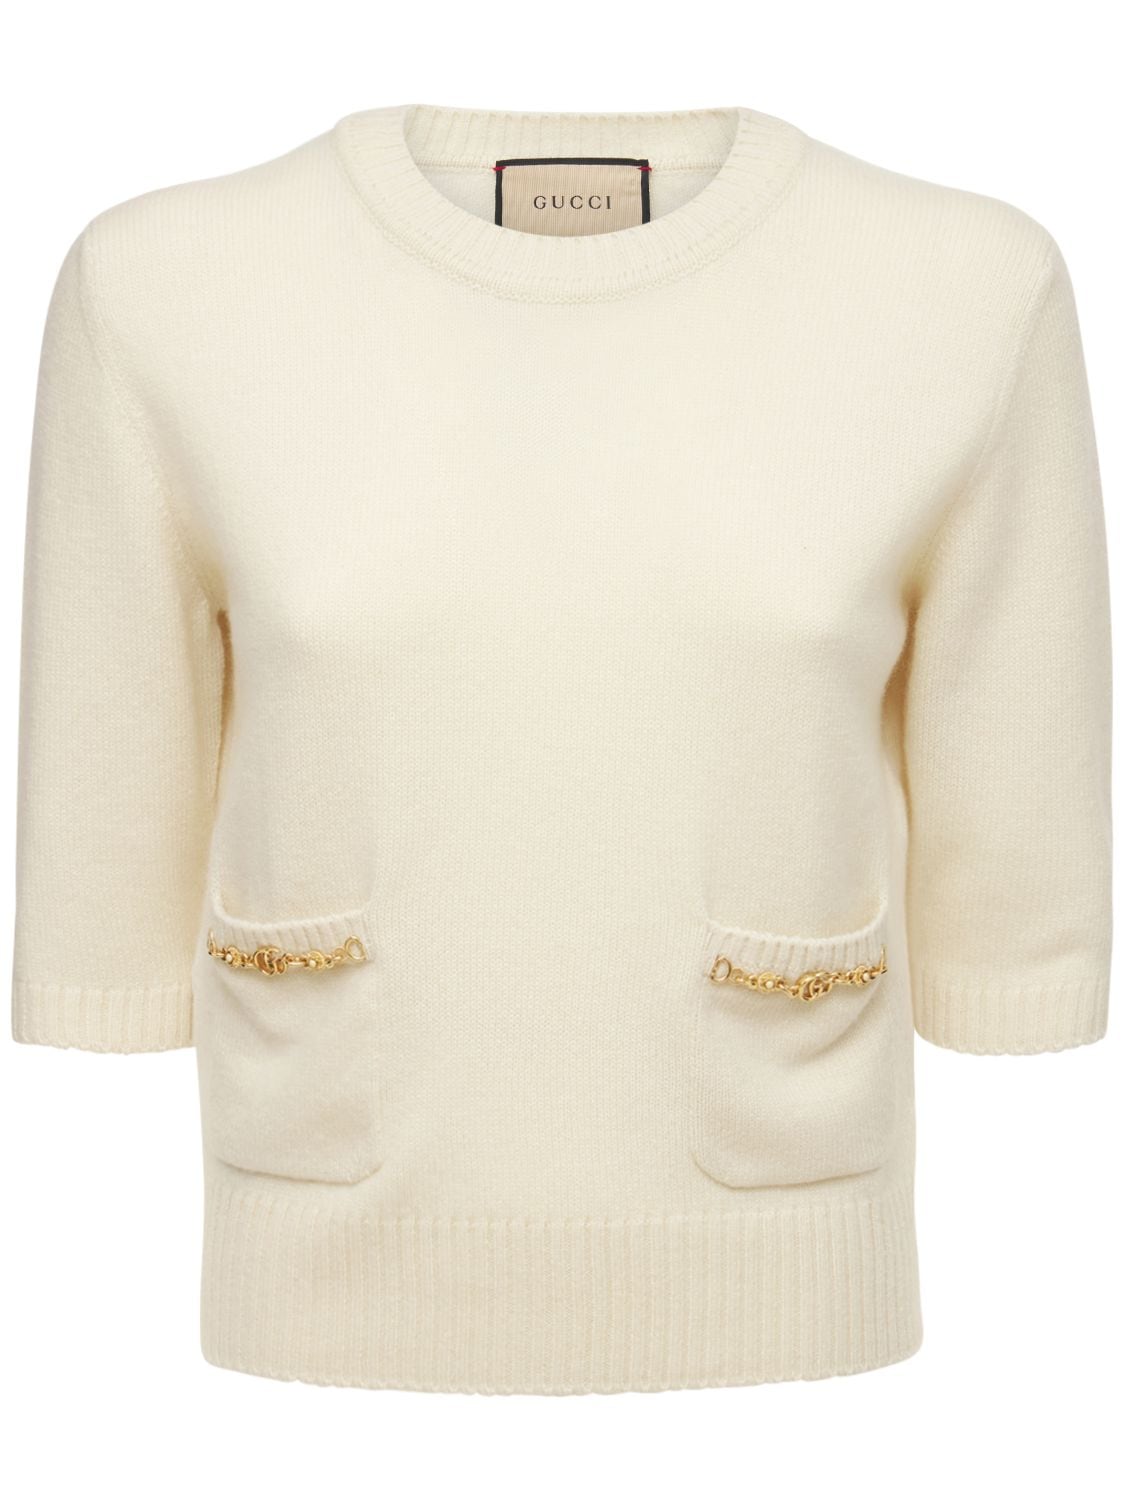 Shop Gucci Cashmere Knit Top W/ Horsebit In Ivory